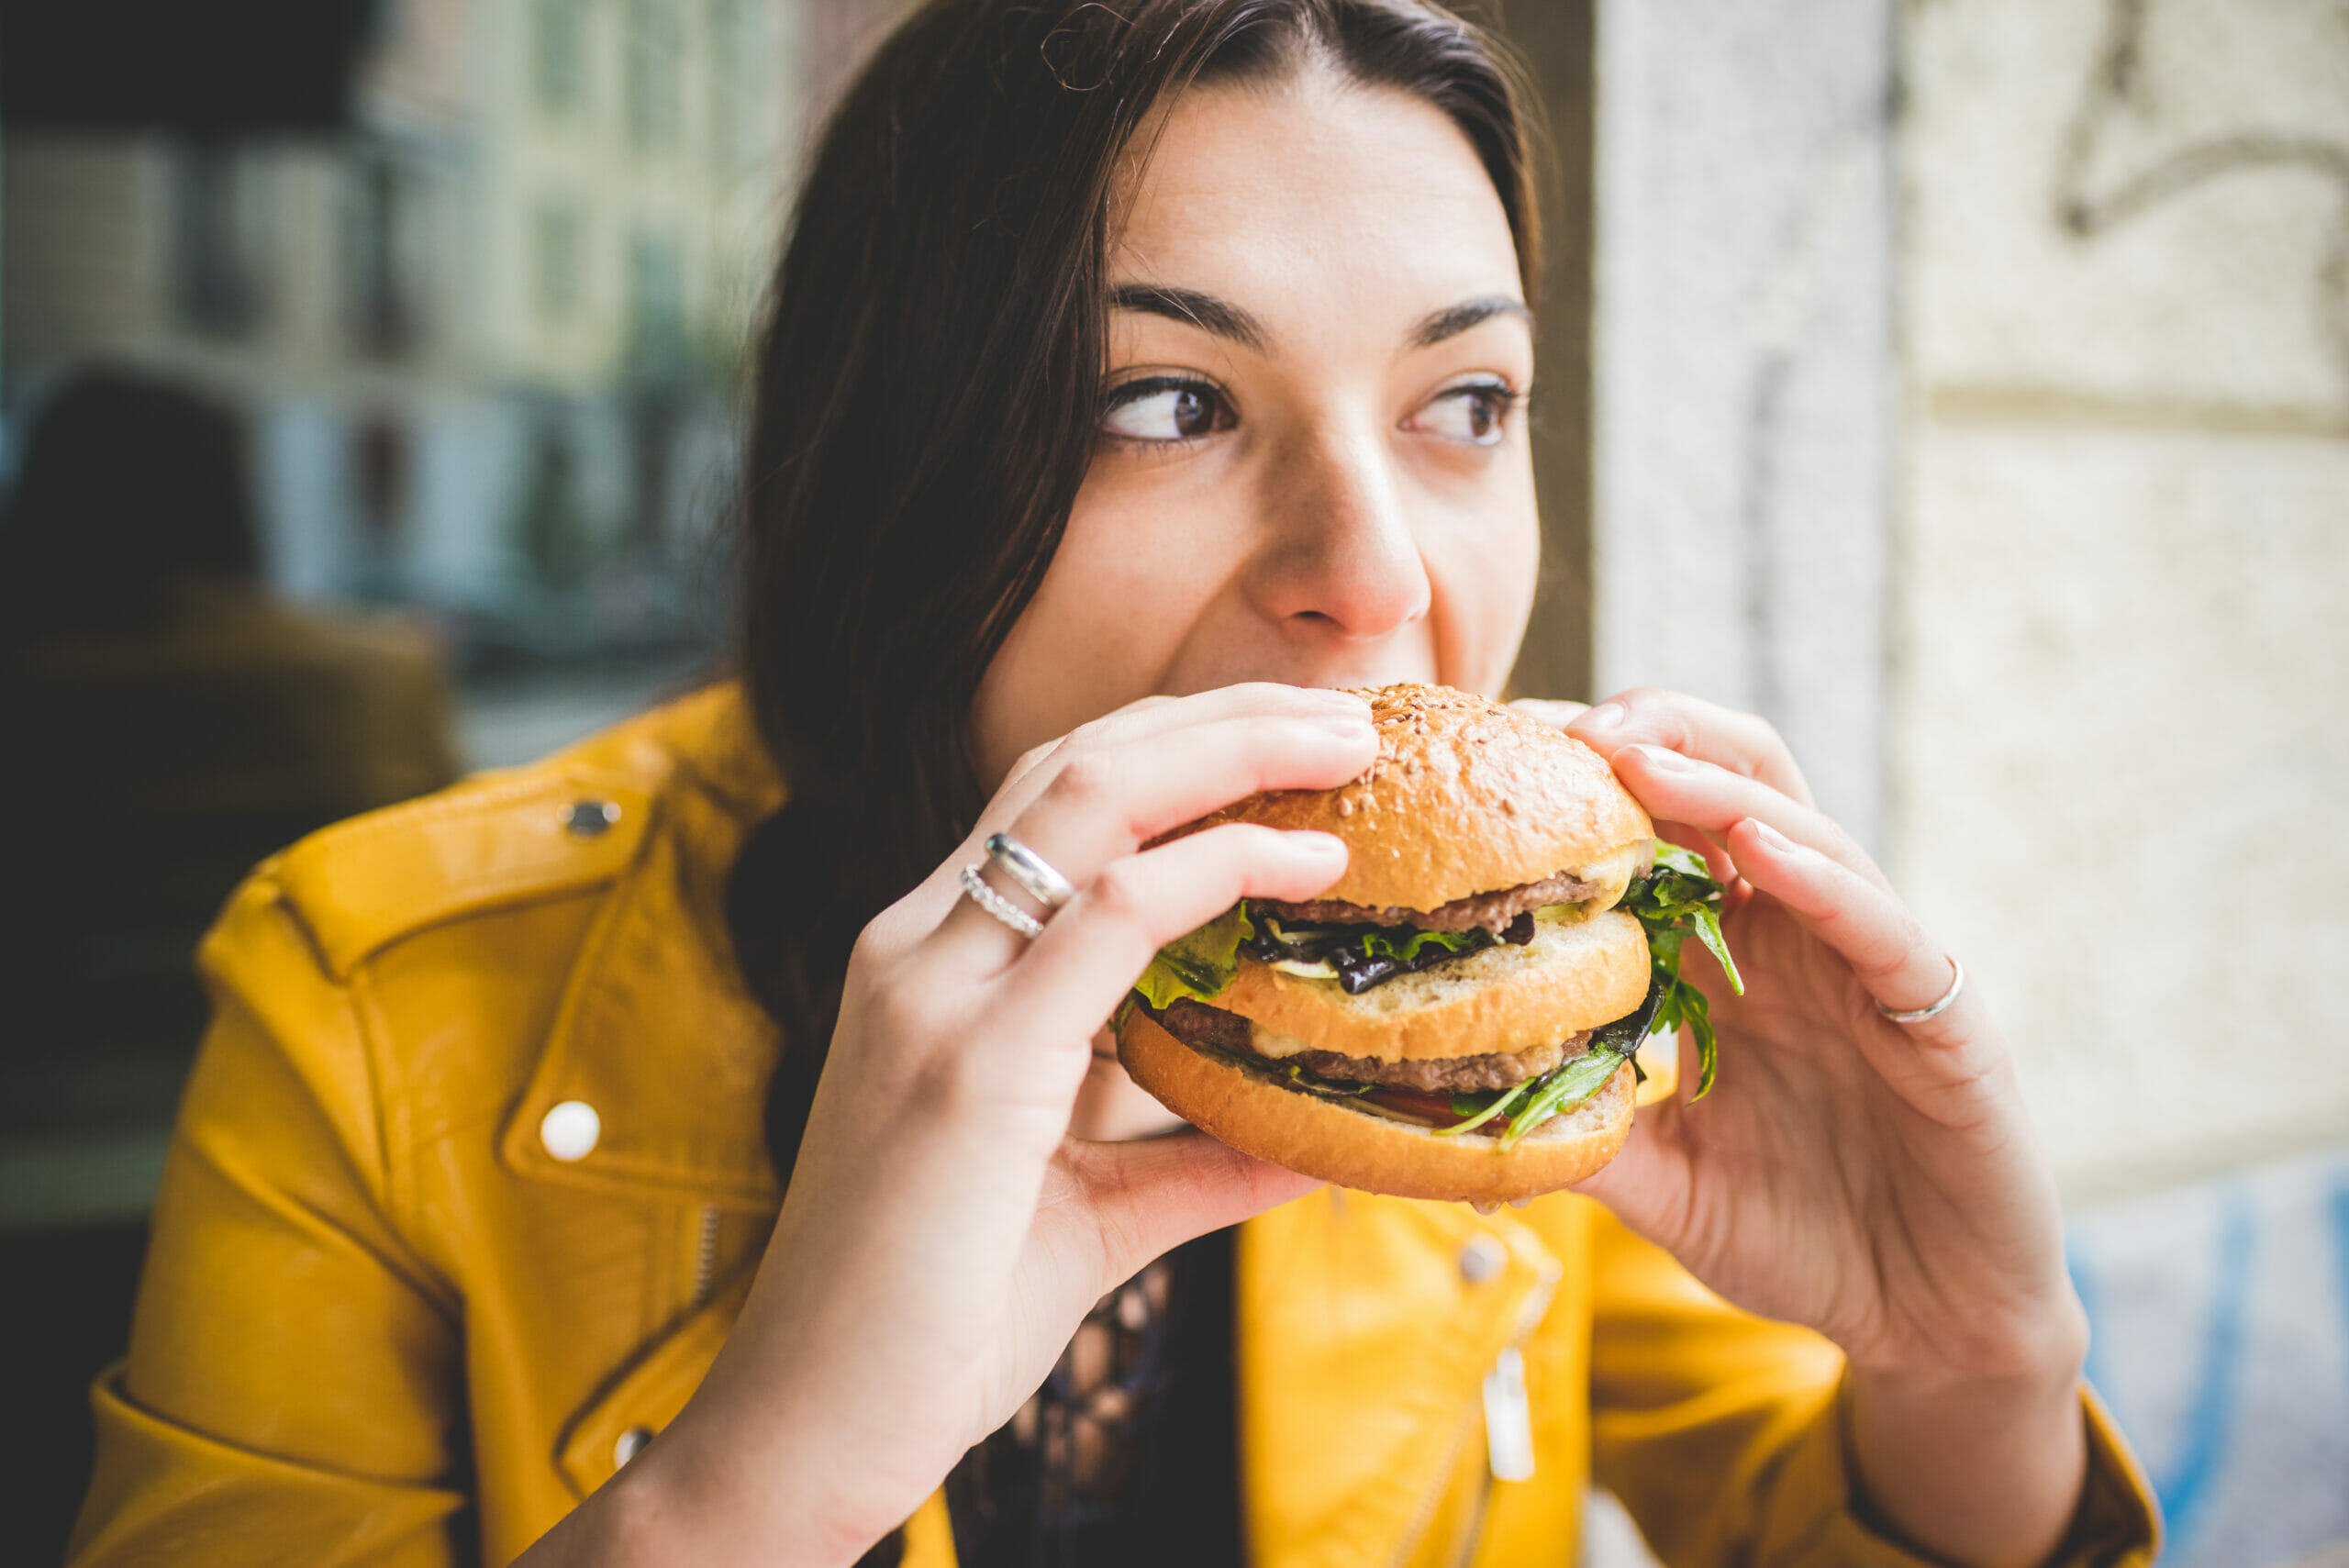 An immigrant woman eating a burger